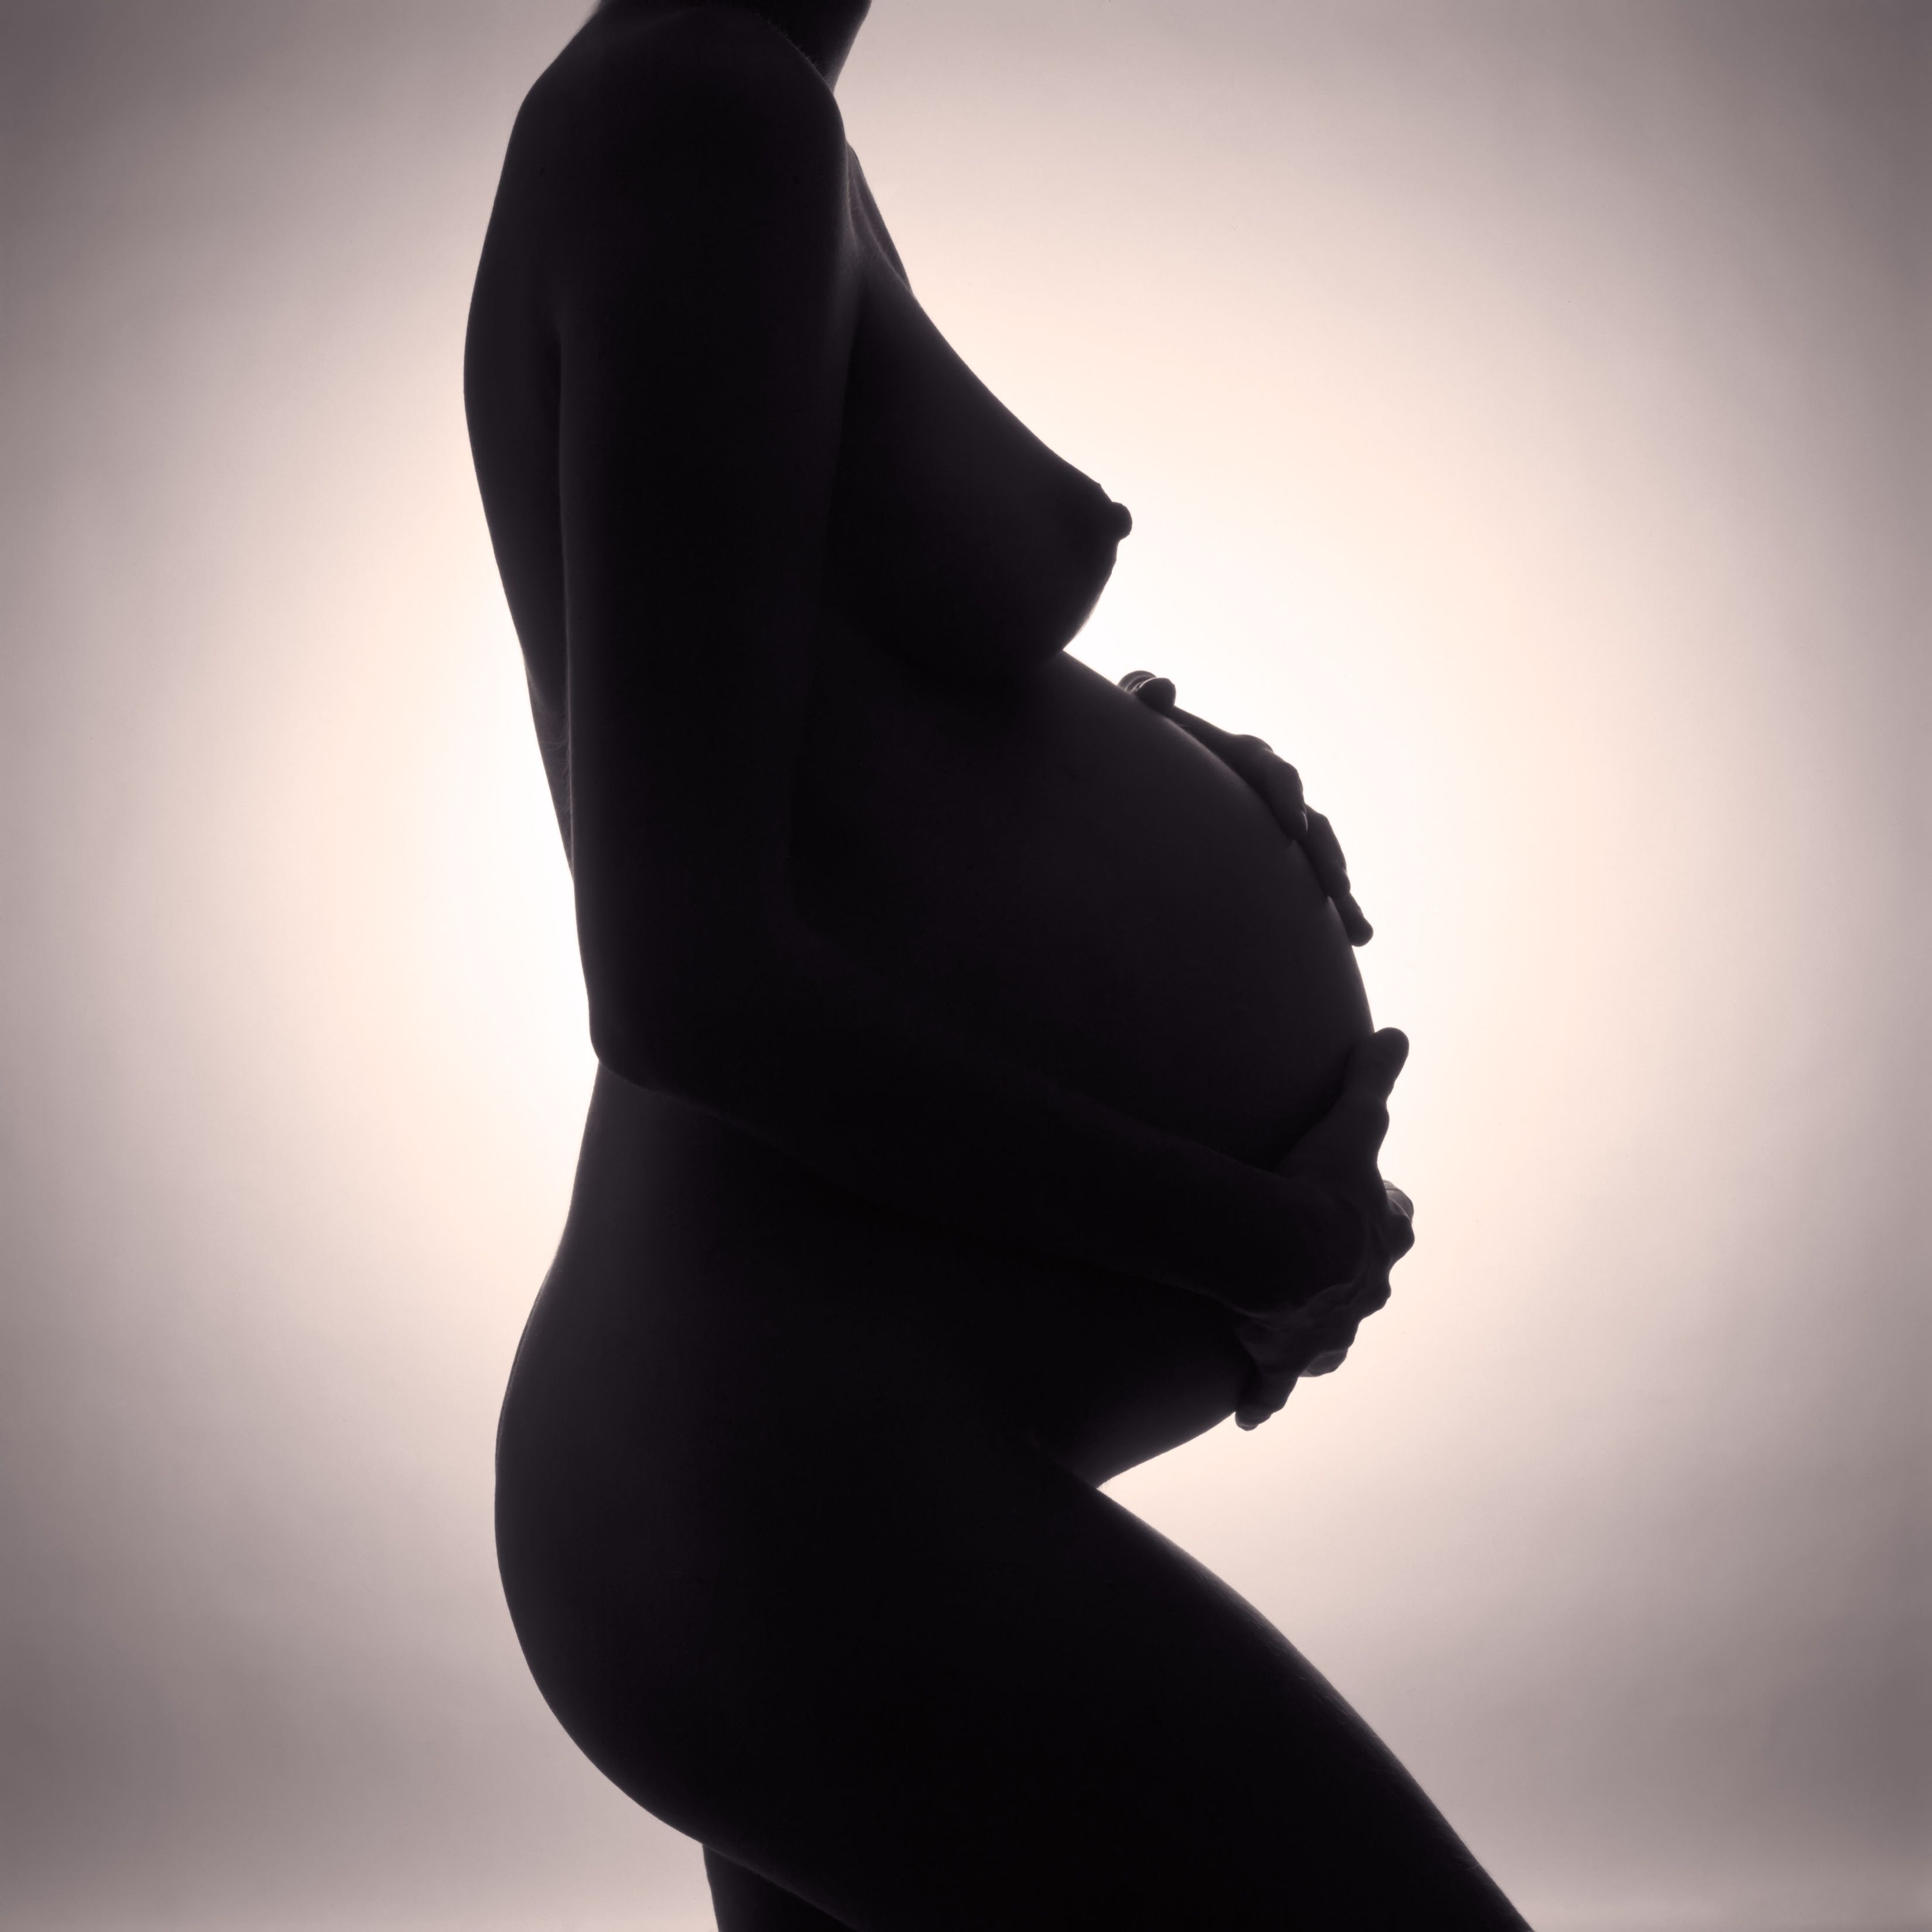 B&W silhouette of pregnant woman with hands on stomach